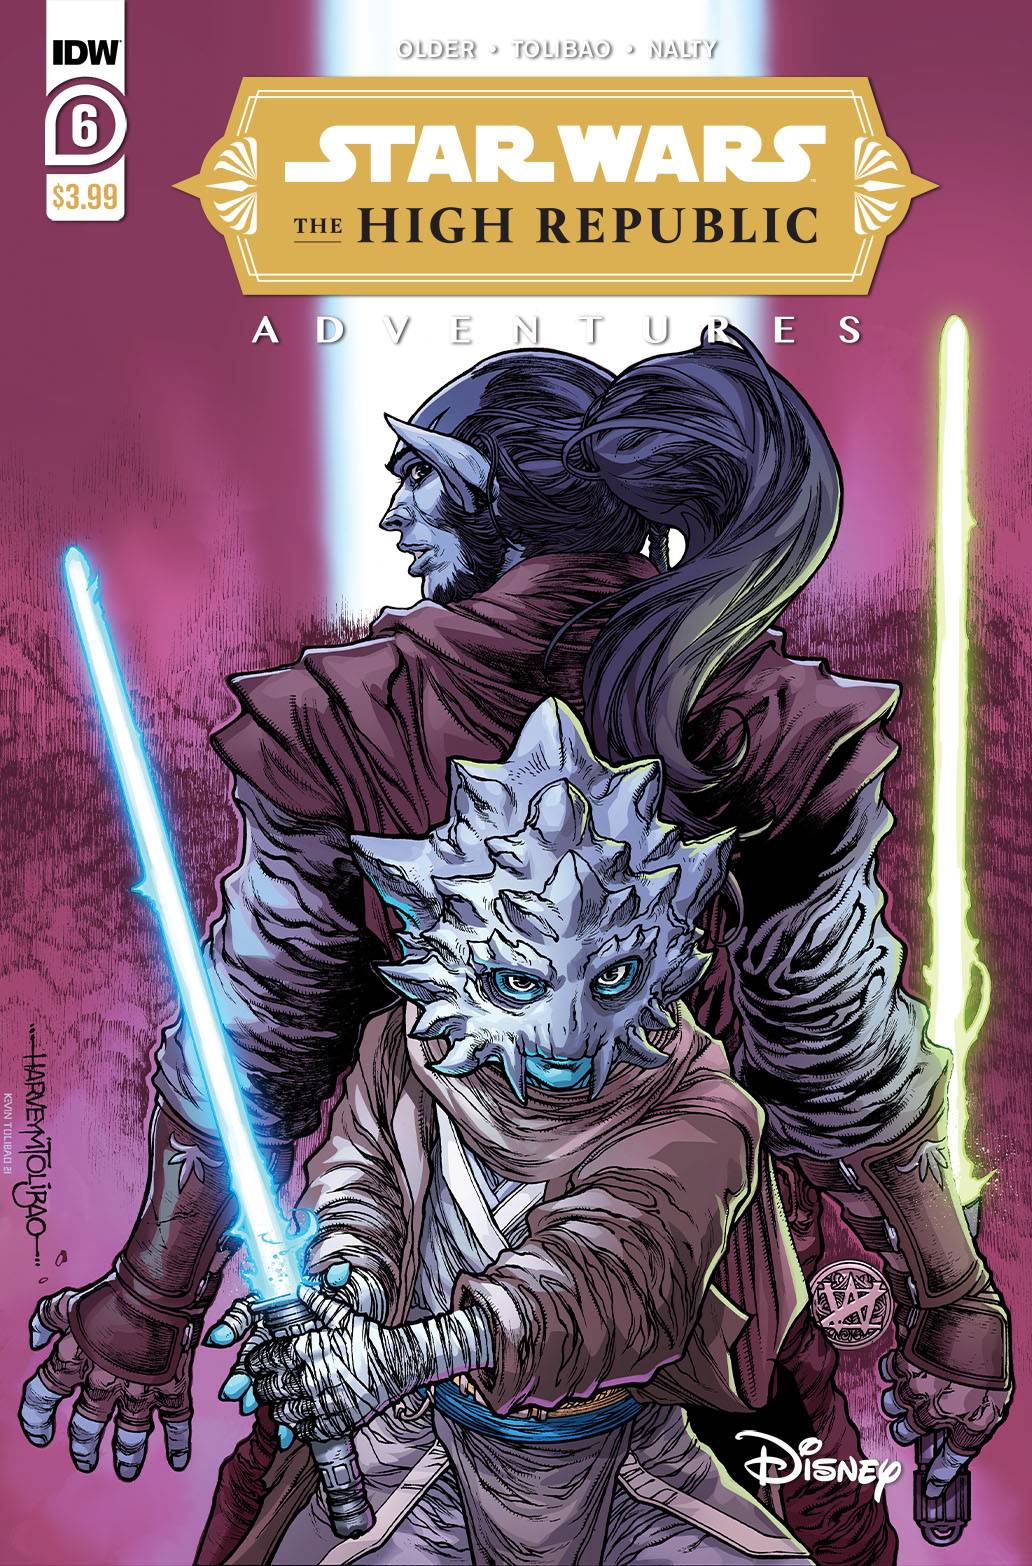 Star Wars: The High Republic Adventures #6 Cover A